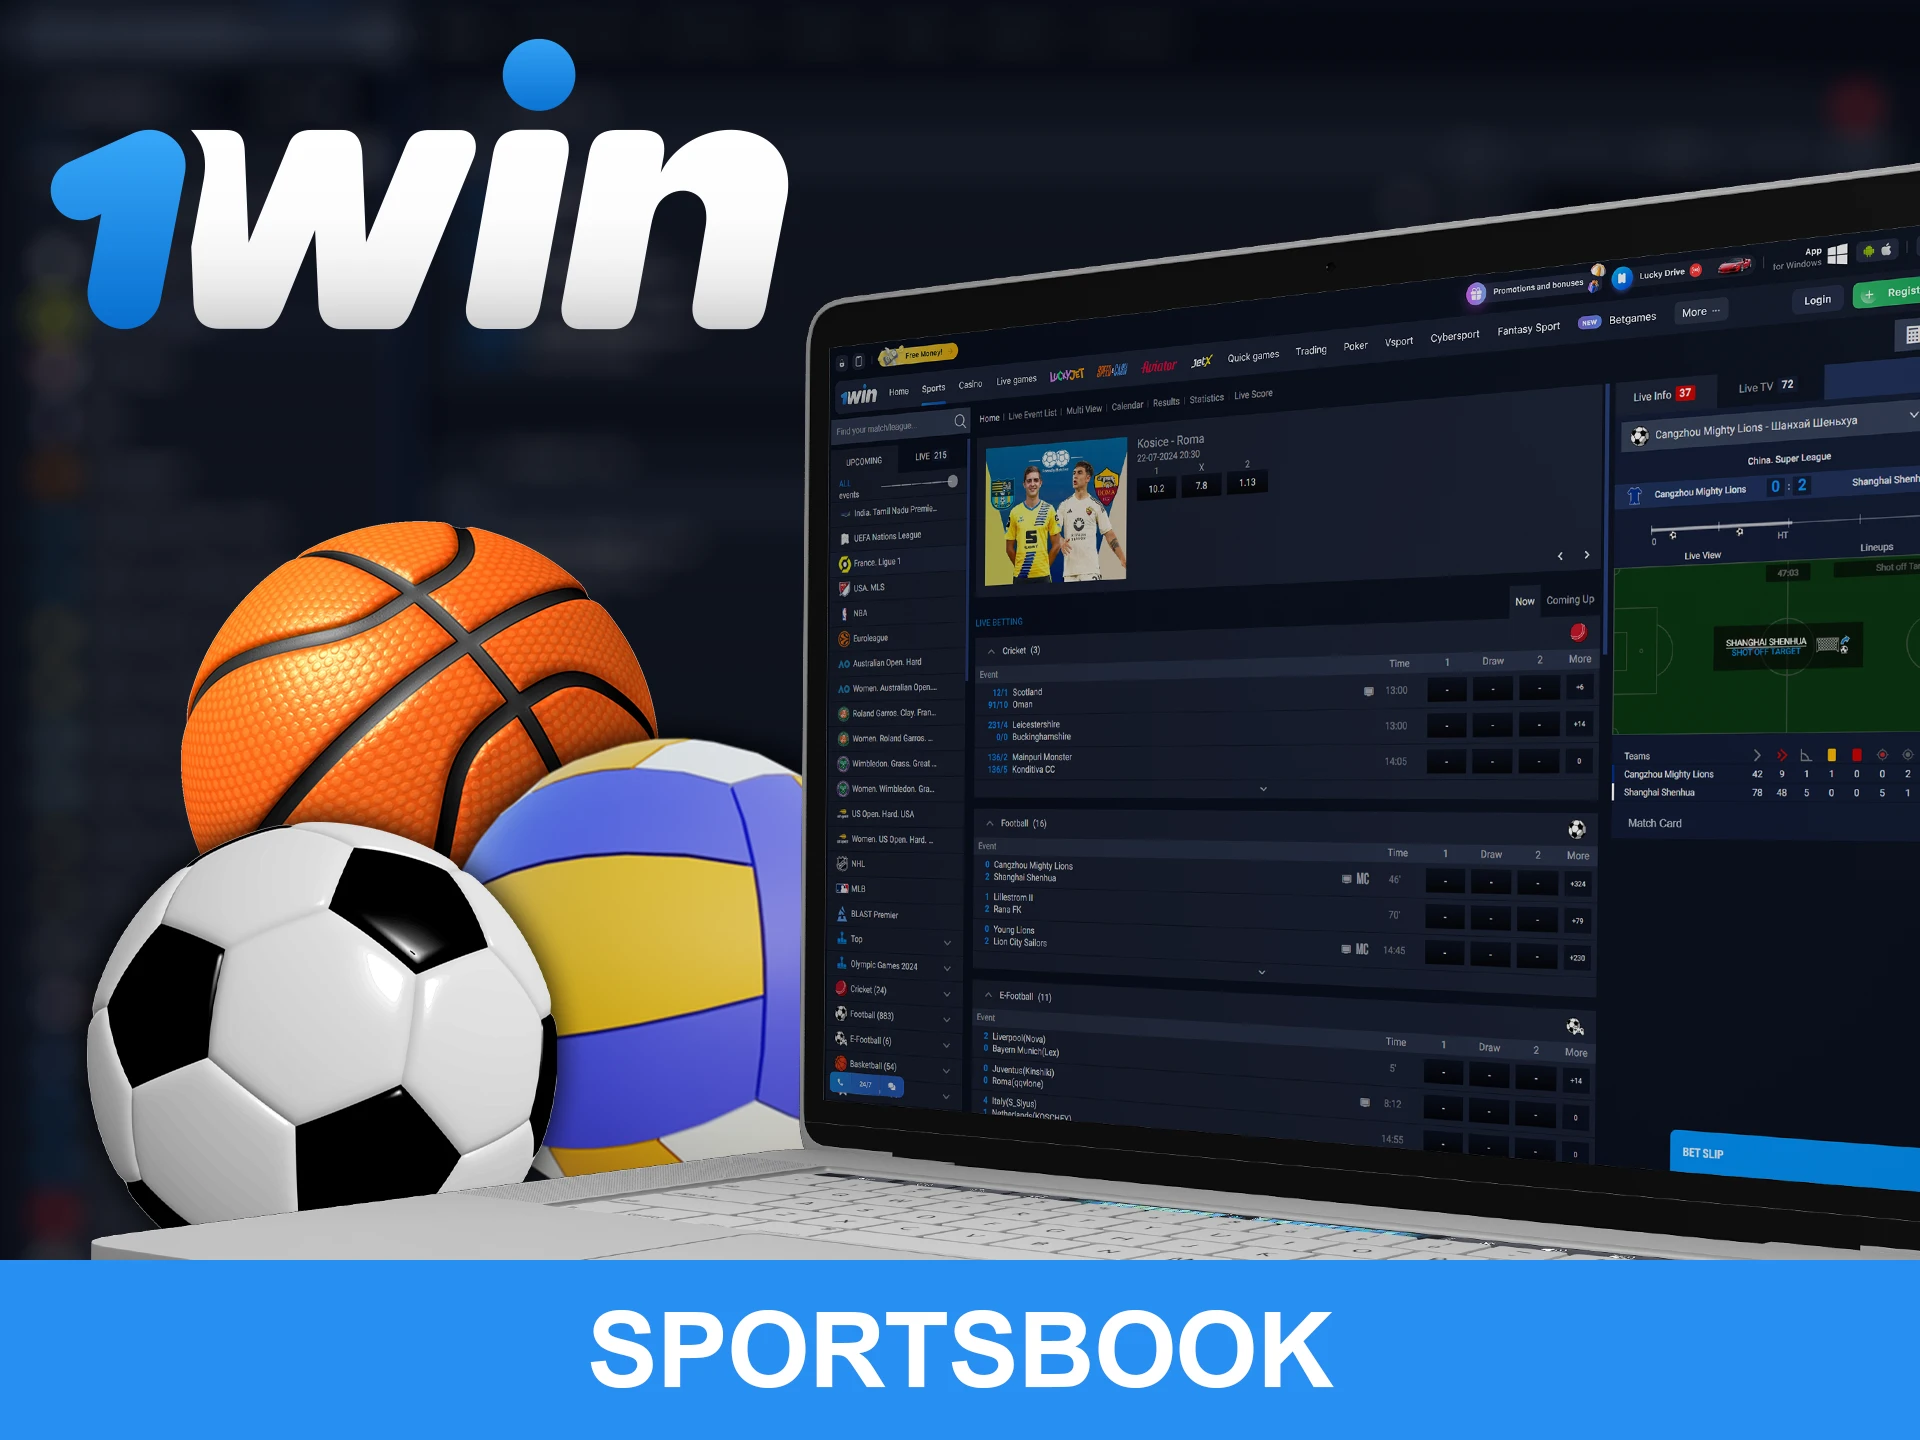 Find out which sports categories for betting at 1win are popular in Bangladesh.